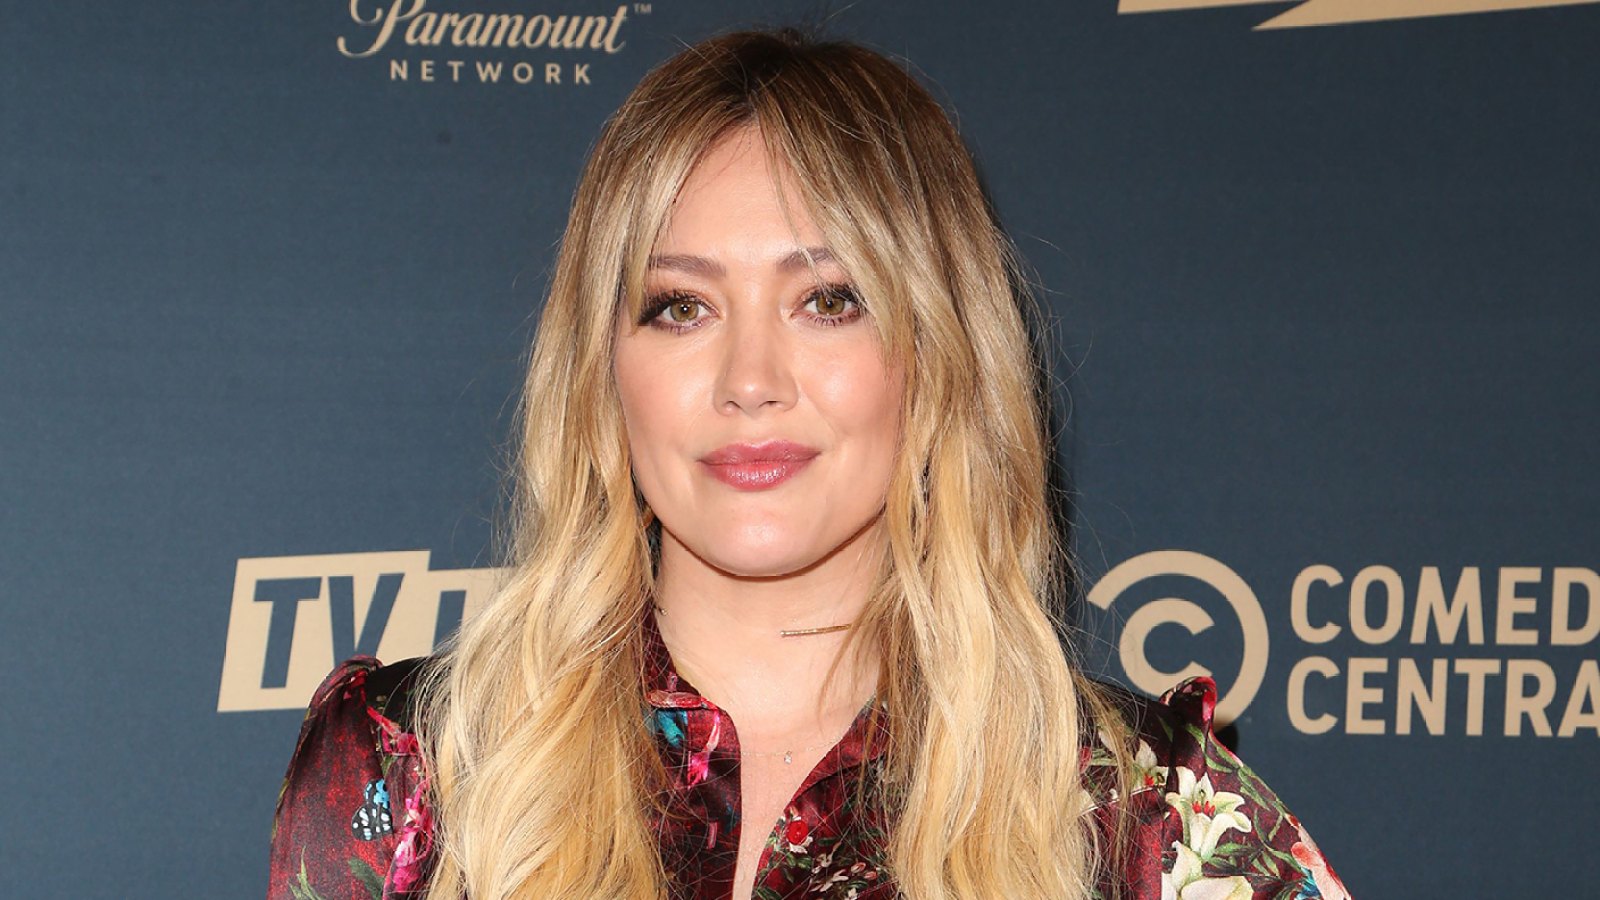 Hilary Duff Tests Positive for Coronavirus and Shares Symptoms